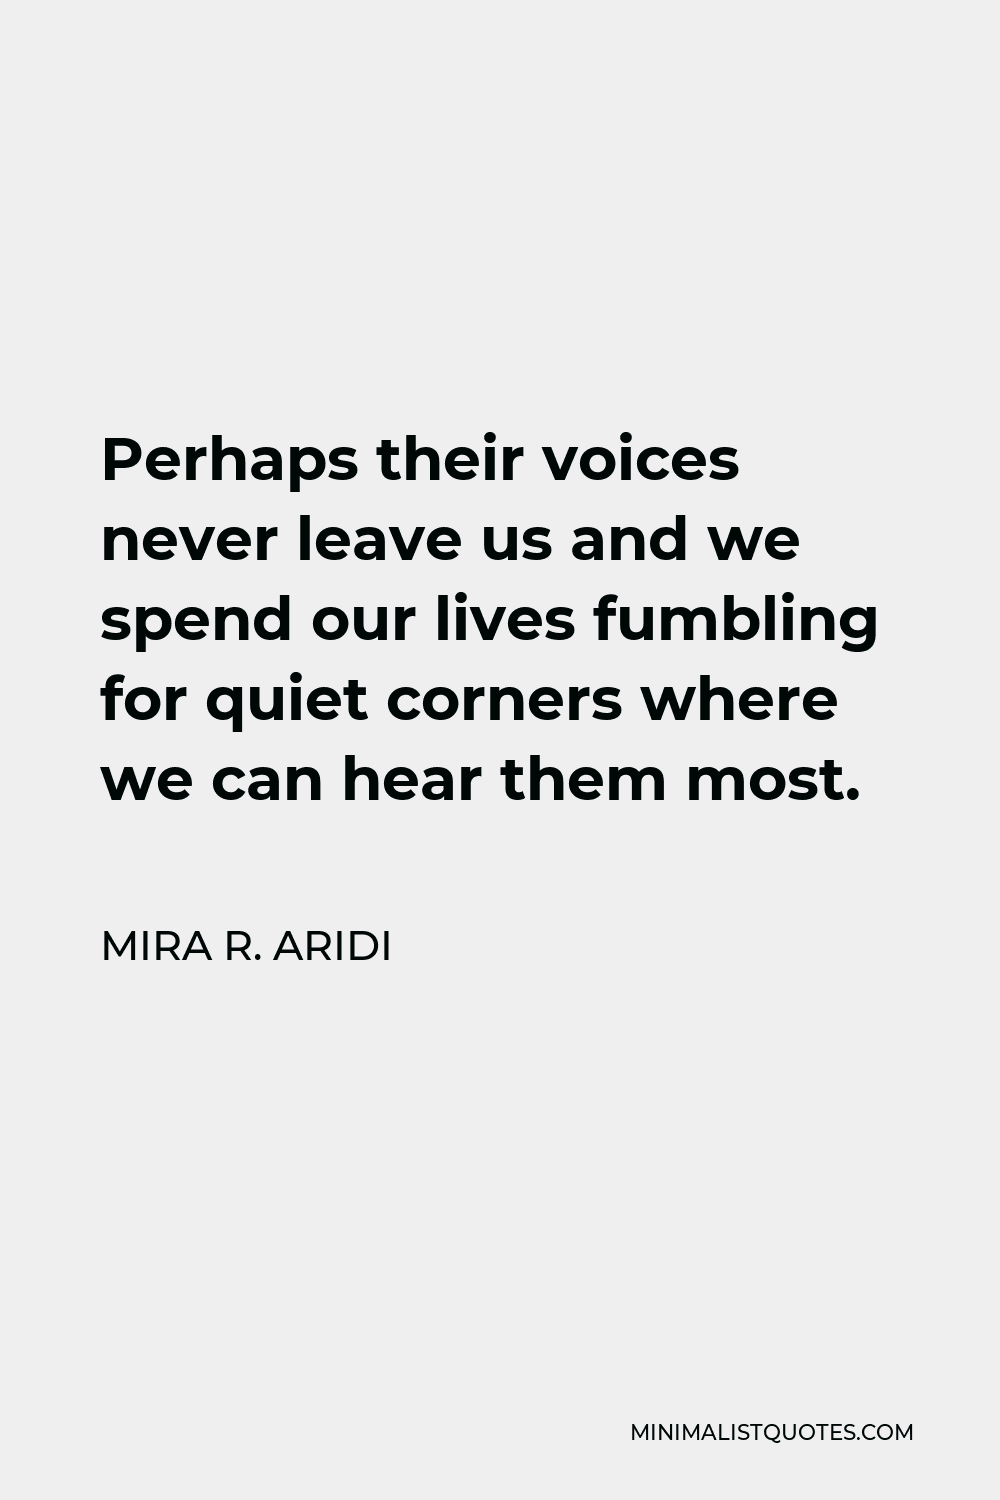 Mira R. Aridi Quote - Perhaps their voices never leave us and we spend our lives fumbling for quiet corners where we can hear them most.